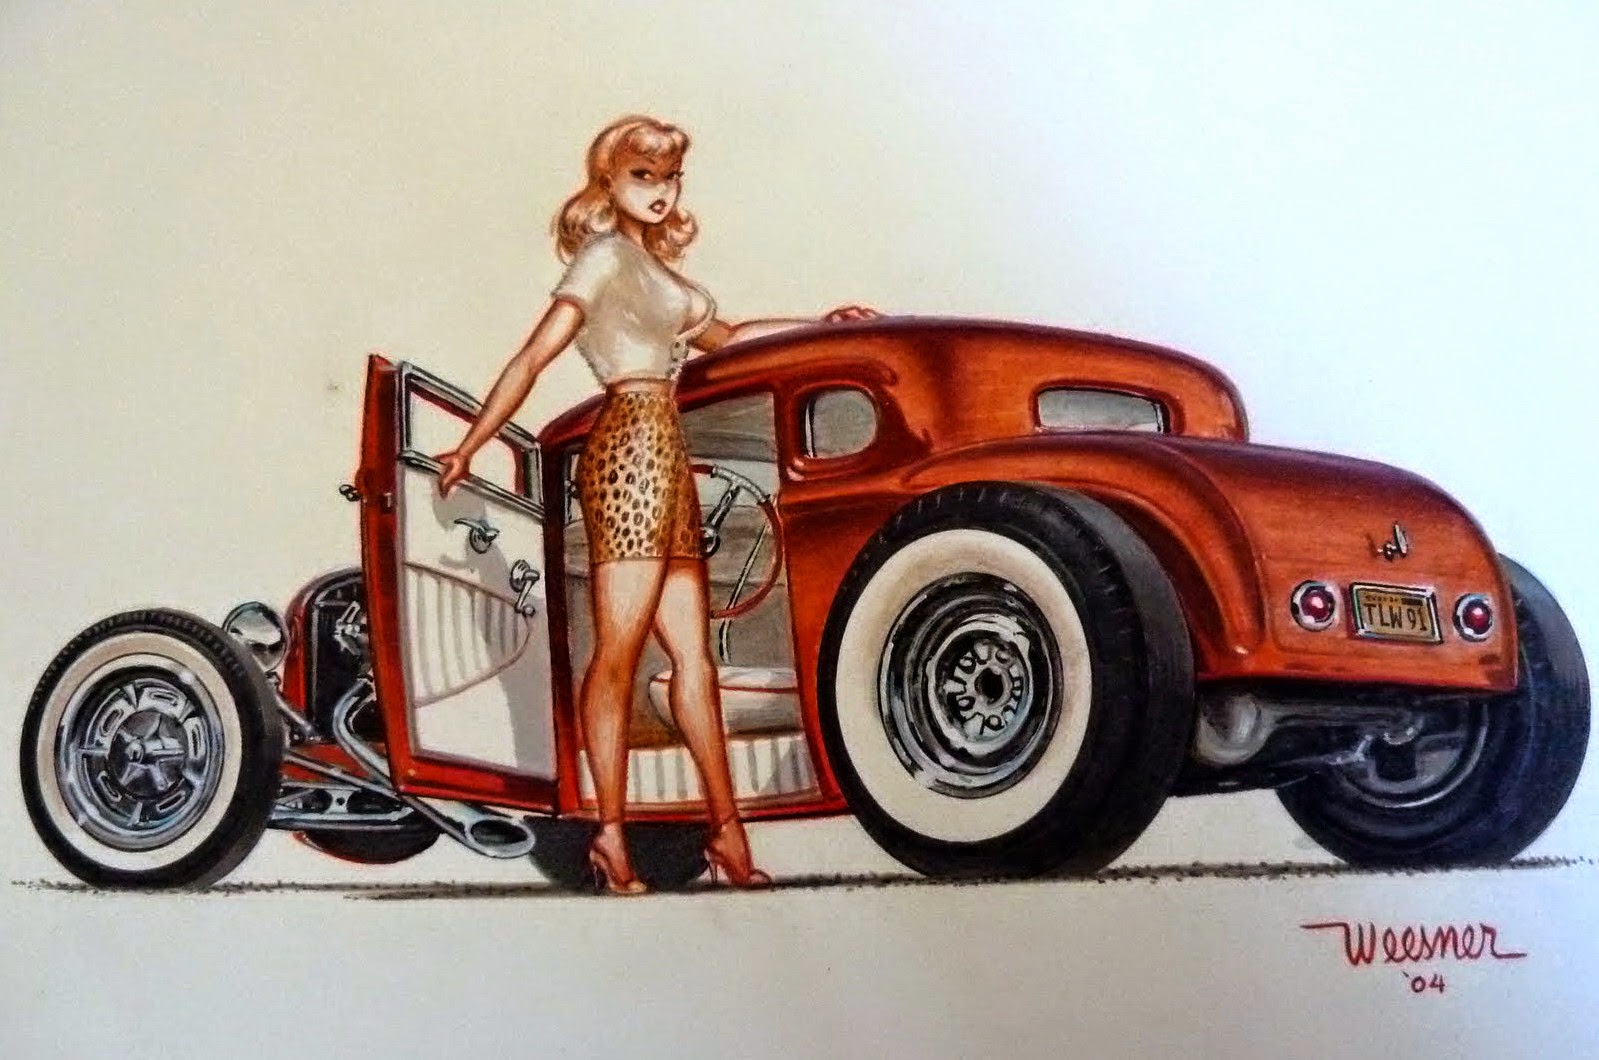 Keith Weesner Pin Up And Cartoon Girls Art Vintage And Modern Artworks